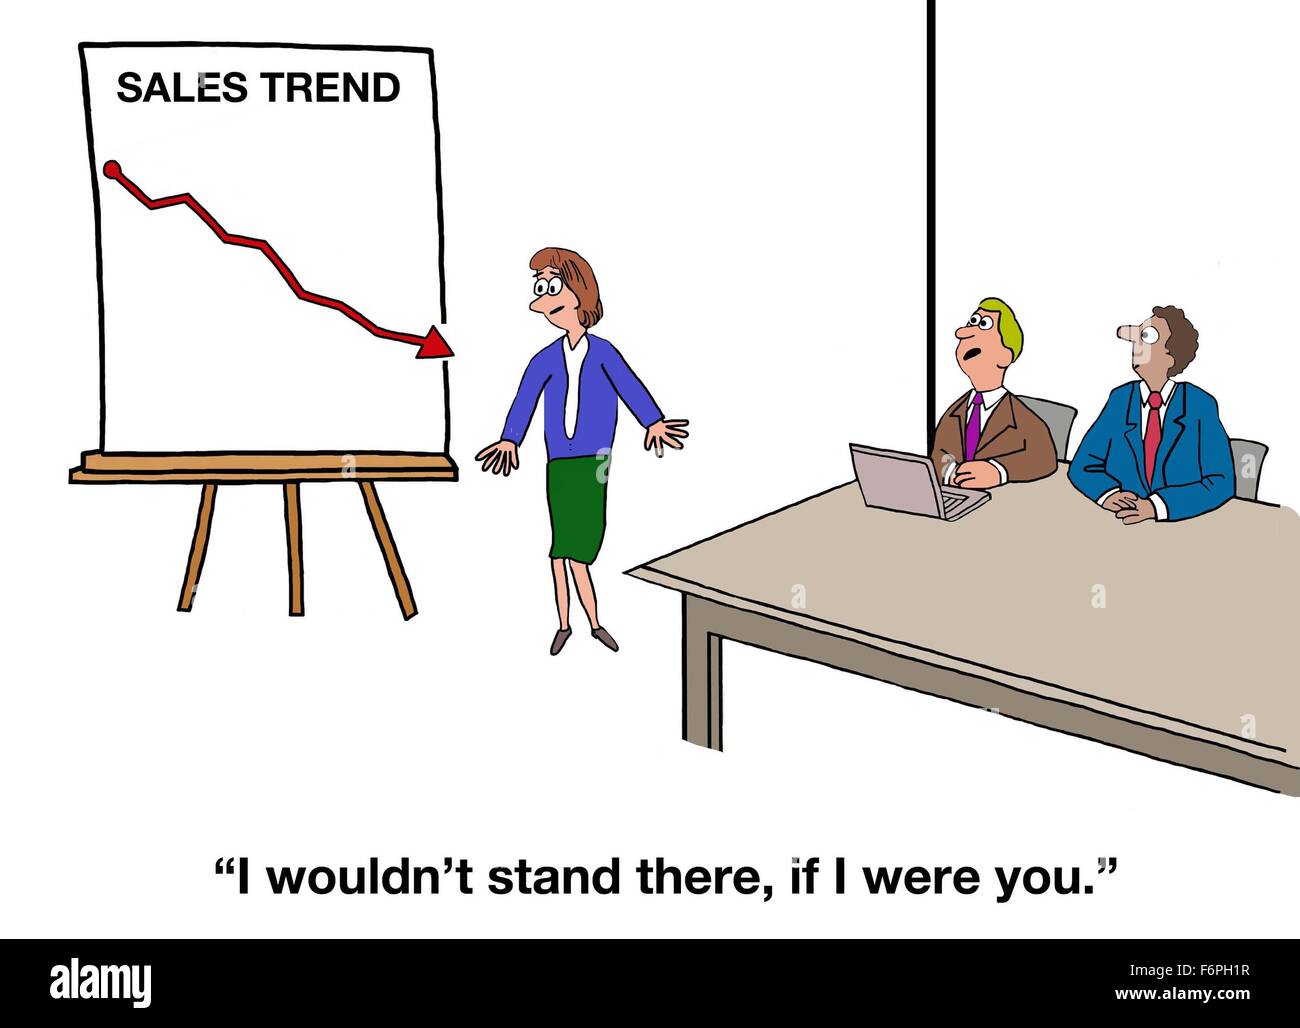 Business cartoon showing a chart with a negative sales trend, 'I wouldn't stand there, if I were you'. Stock Photo